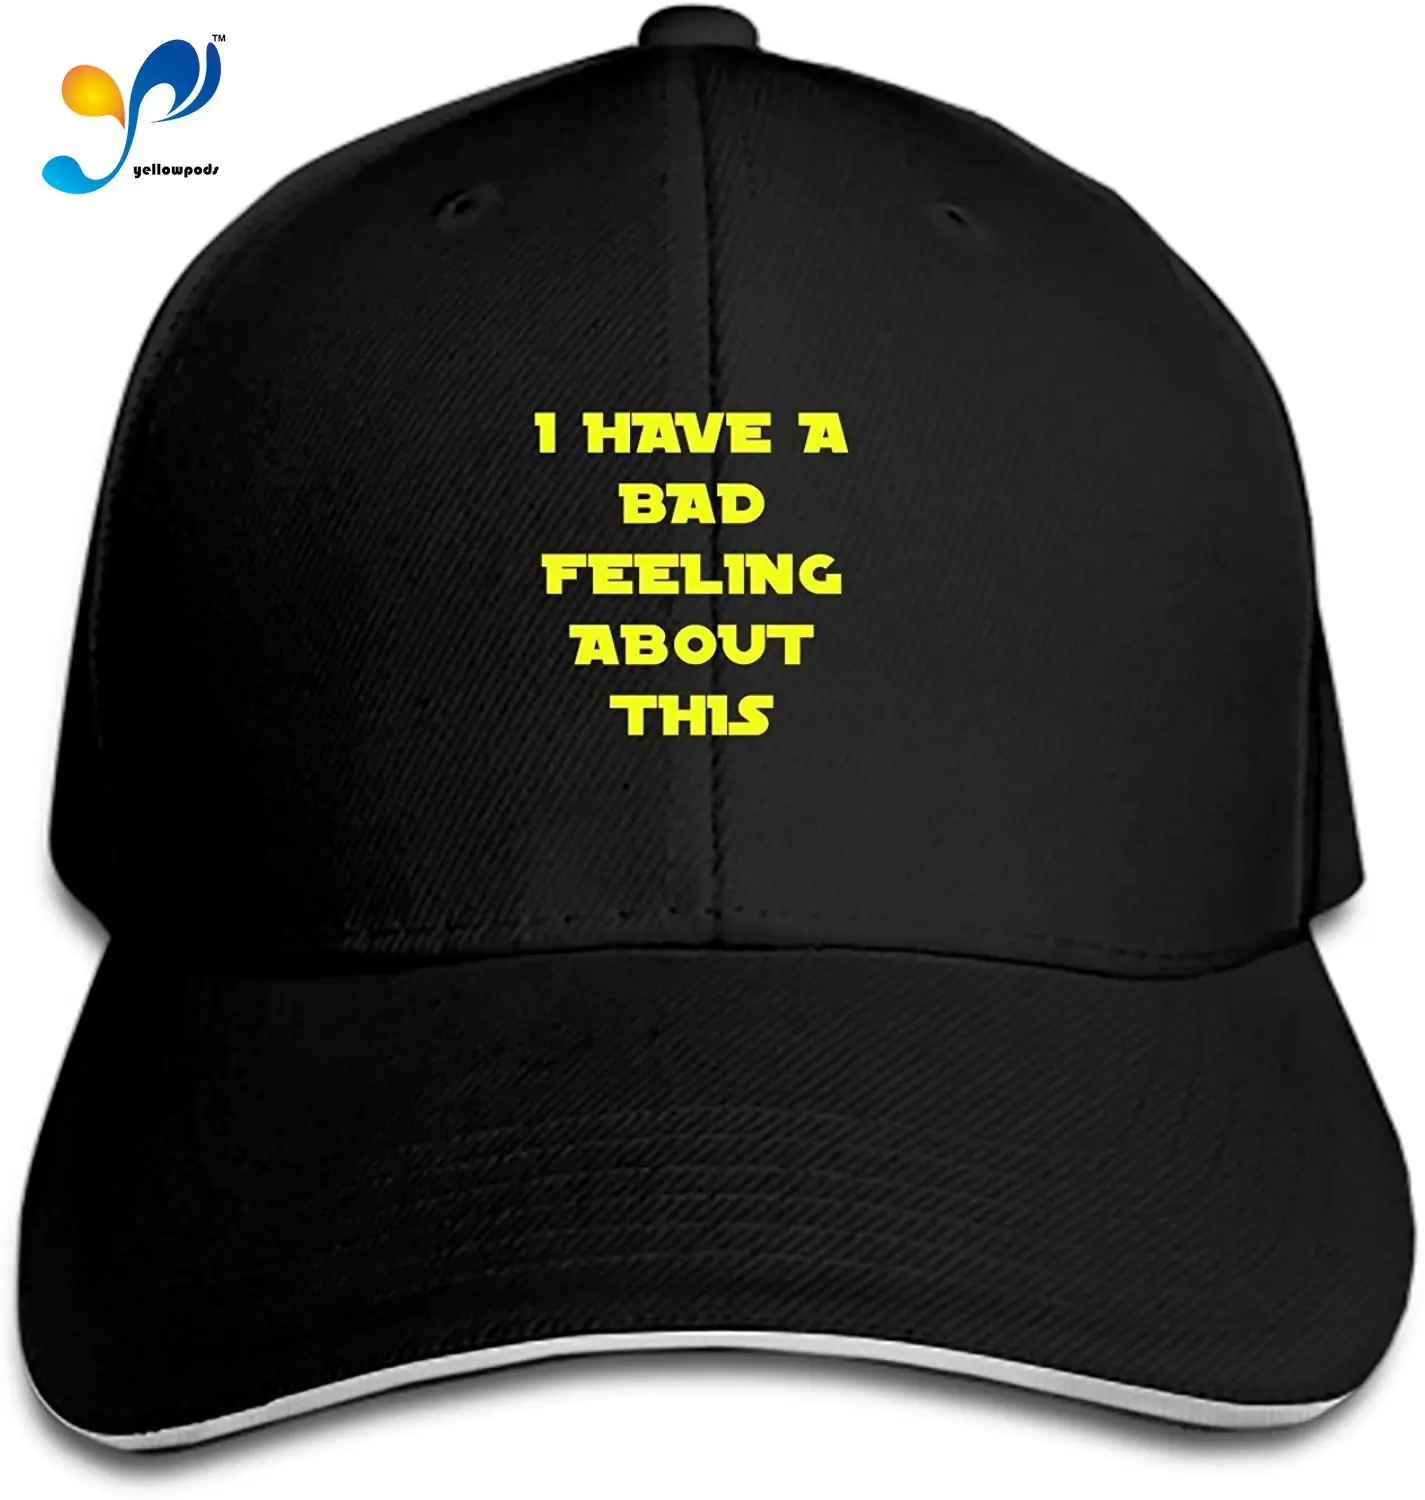 

Customized Unisex Trucker Baseball Cap Adjustable I Have A Bad Feeling About This Peaked Sandwich Hat